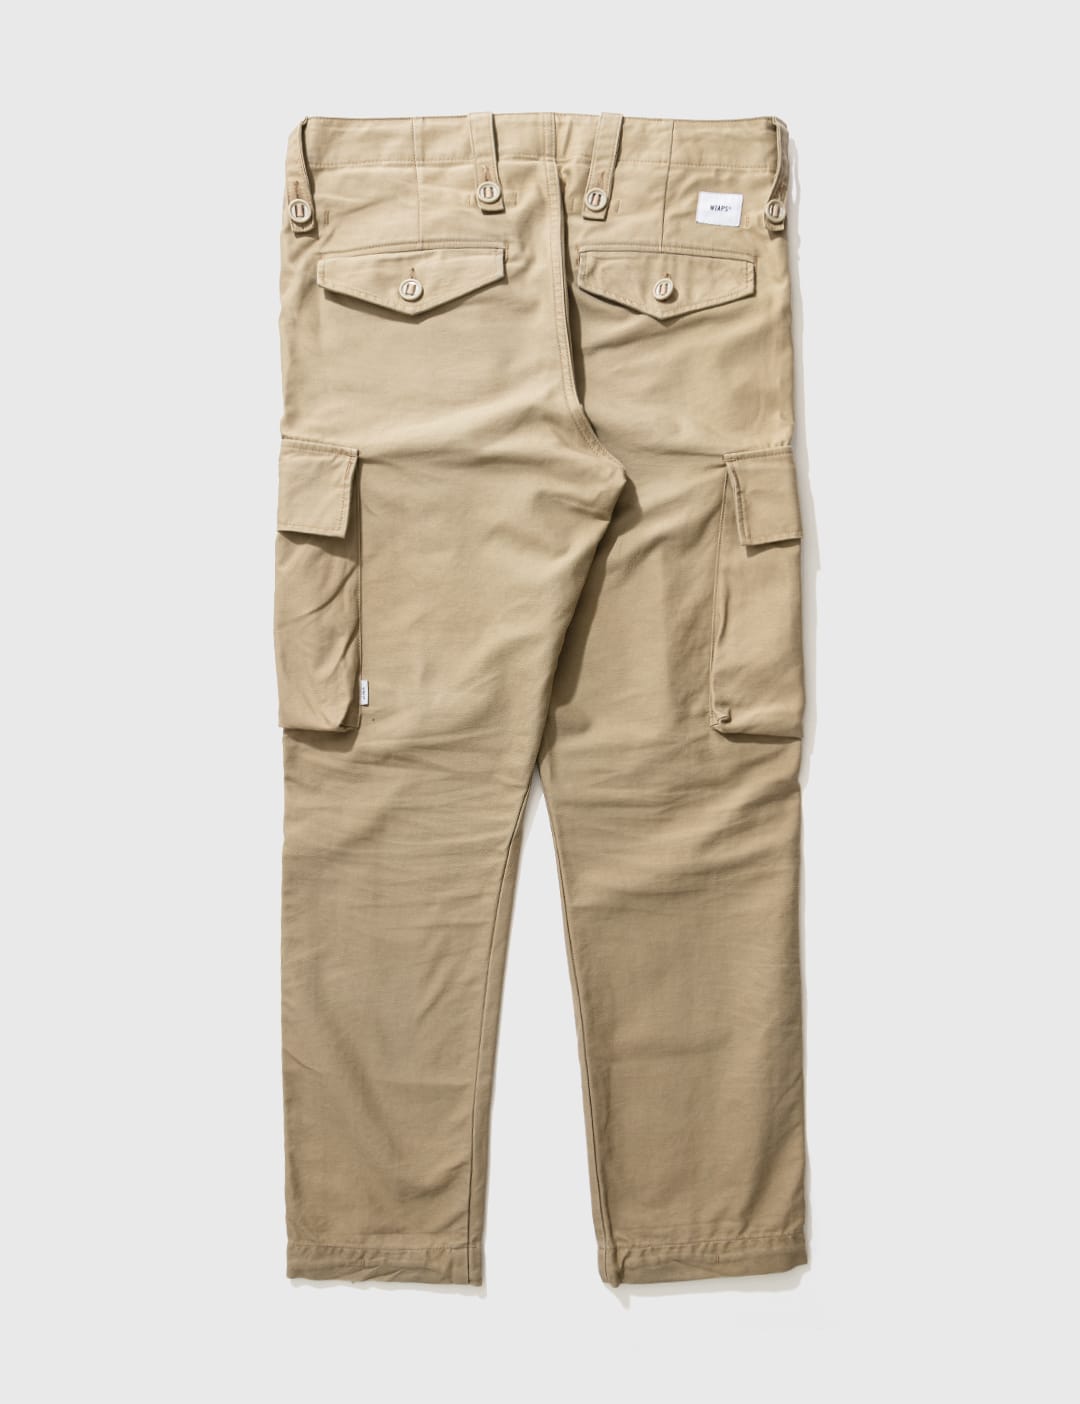 CriX Fashion  Branded Cargo Pants Buy 2 Get one free  Facebook